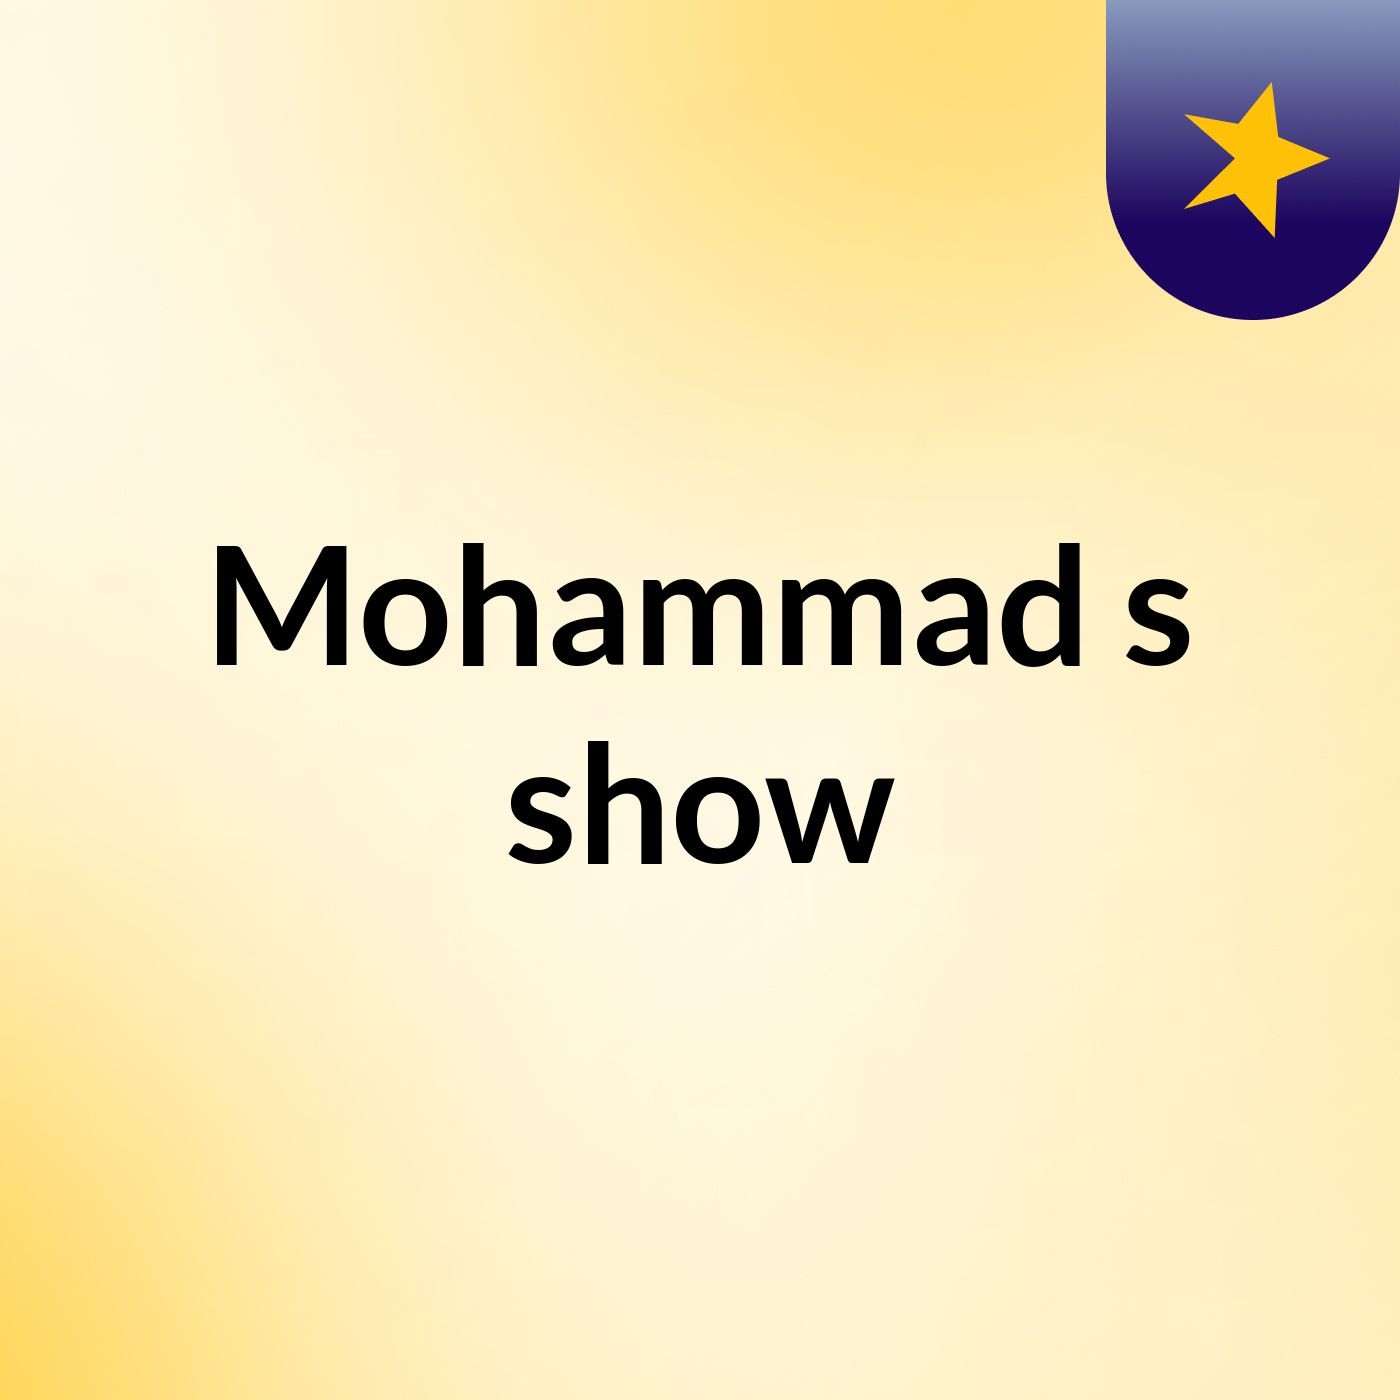 Mohammad's show